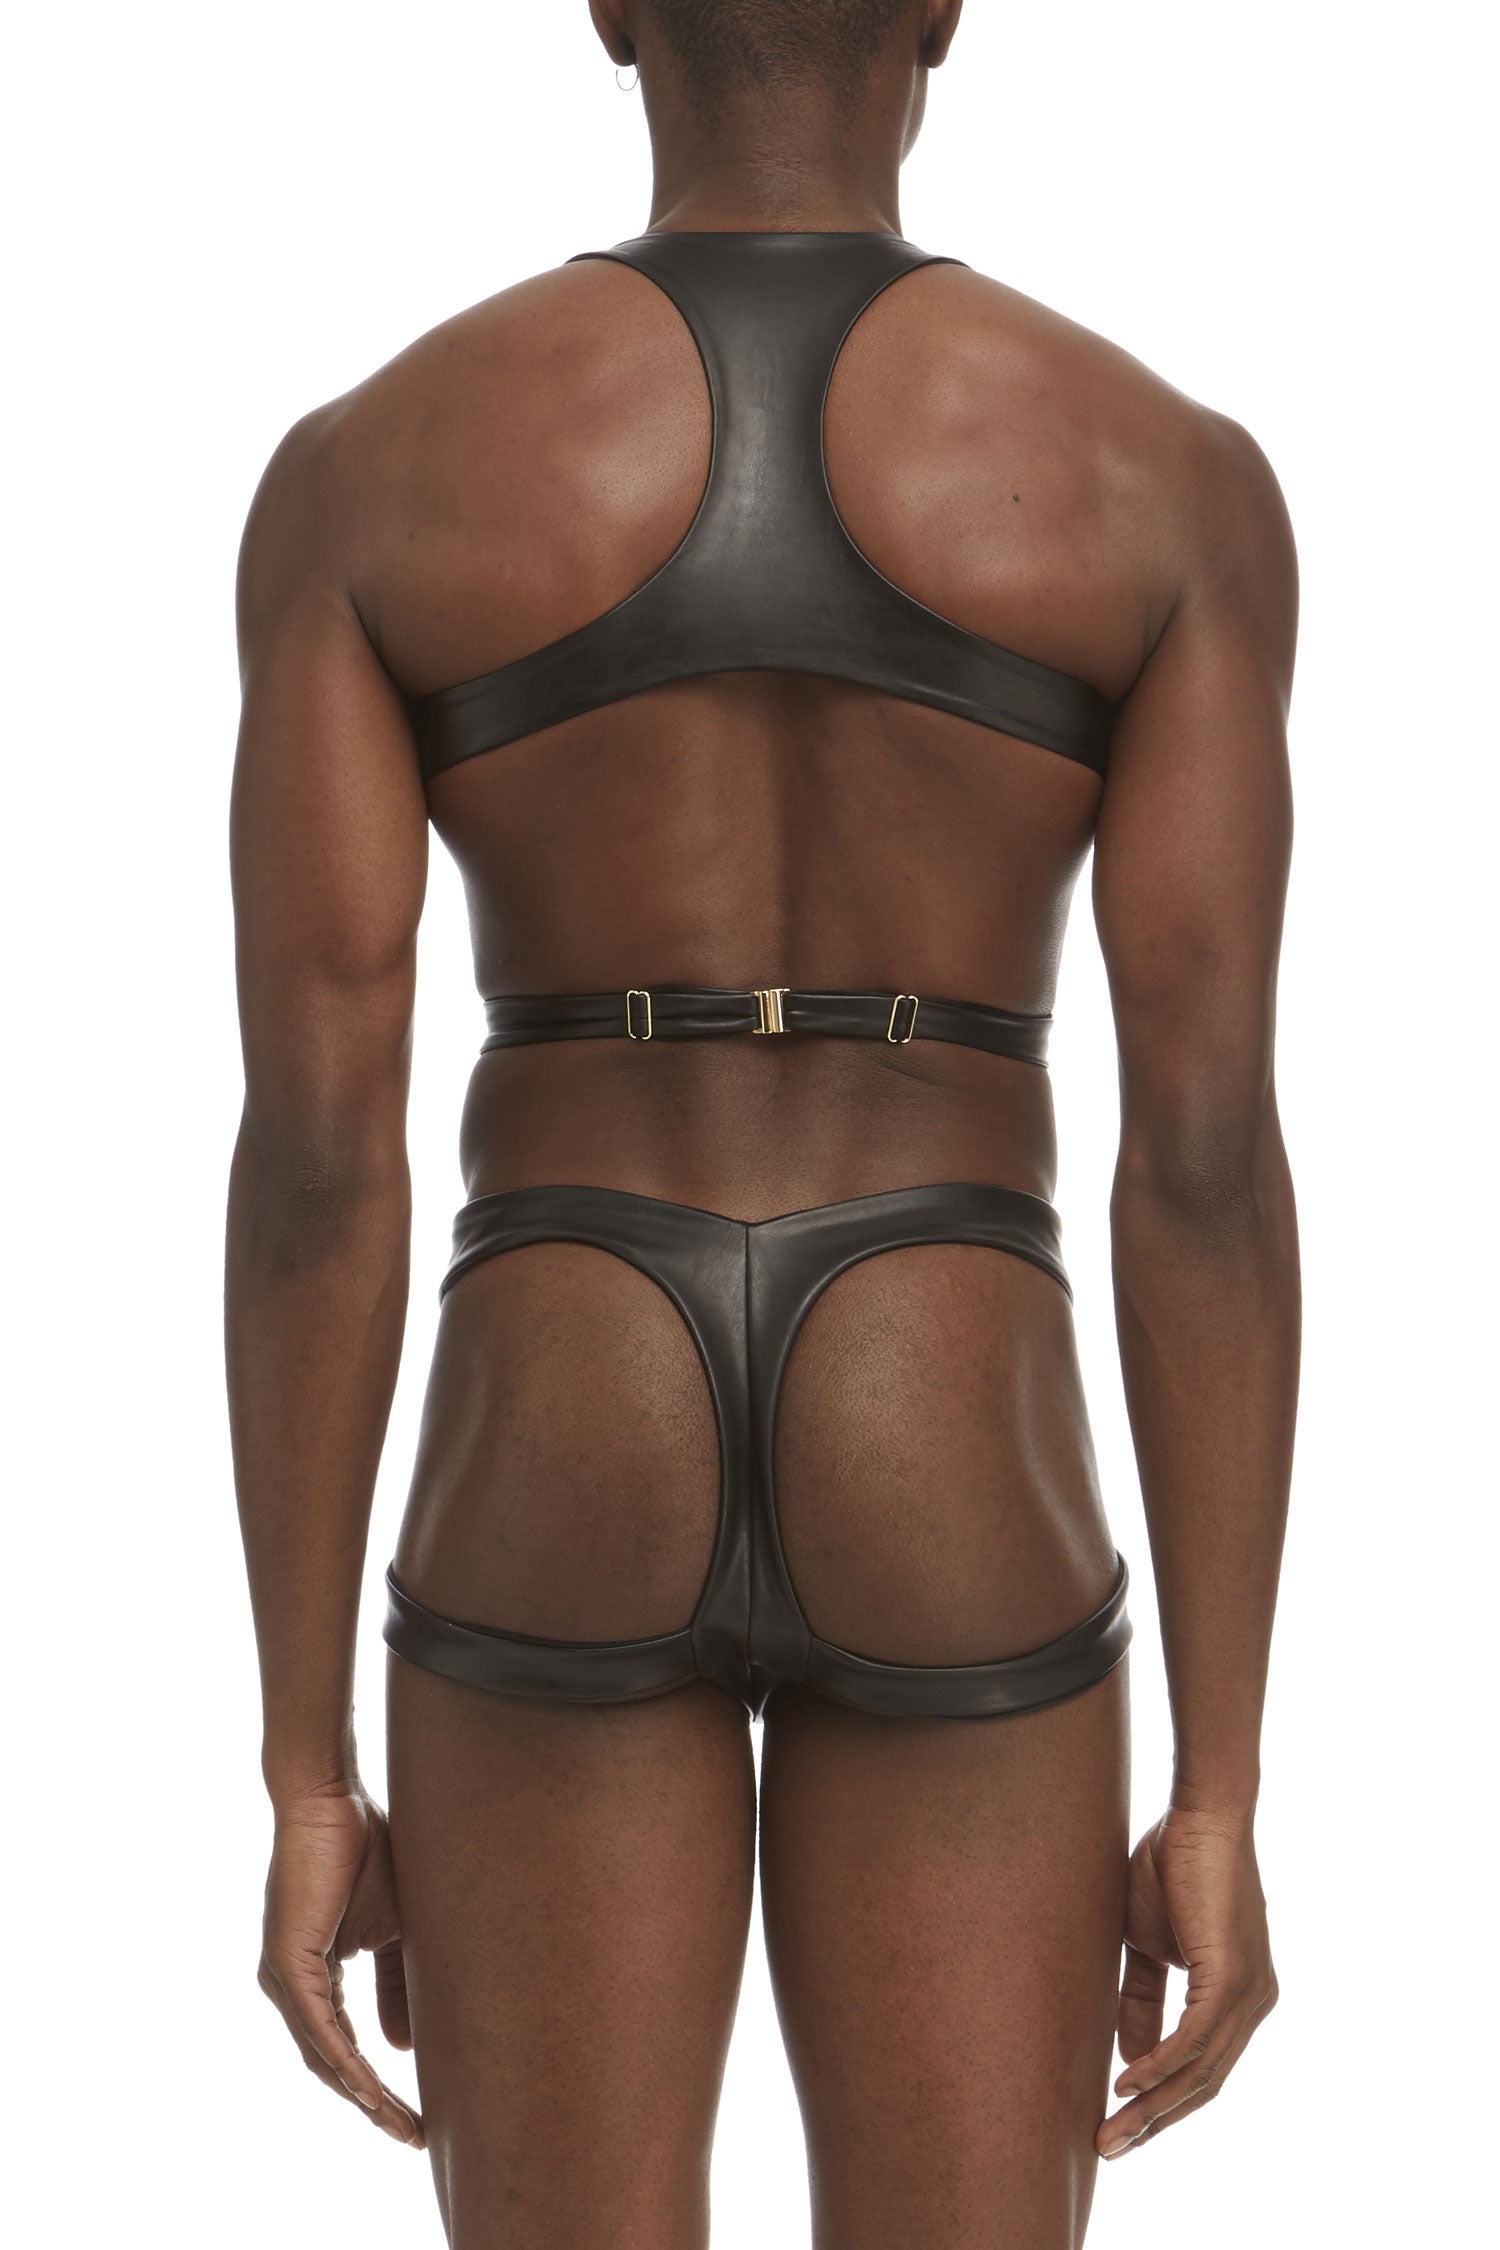 DSTM Maya mens harness and thong in vegan leather - back